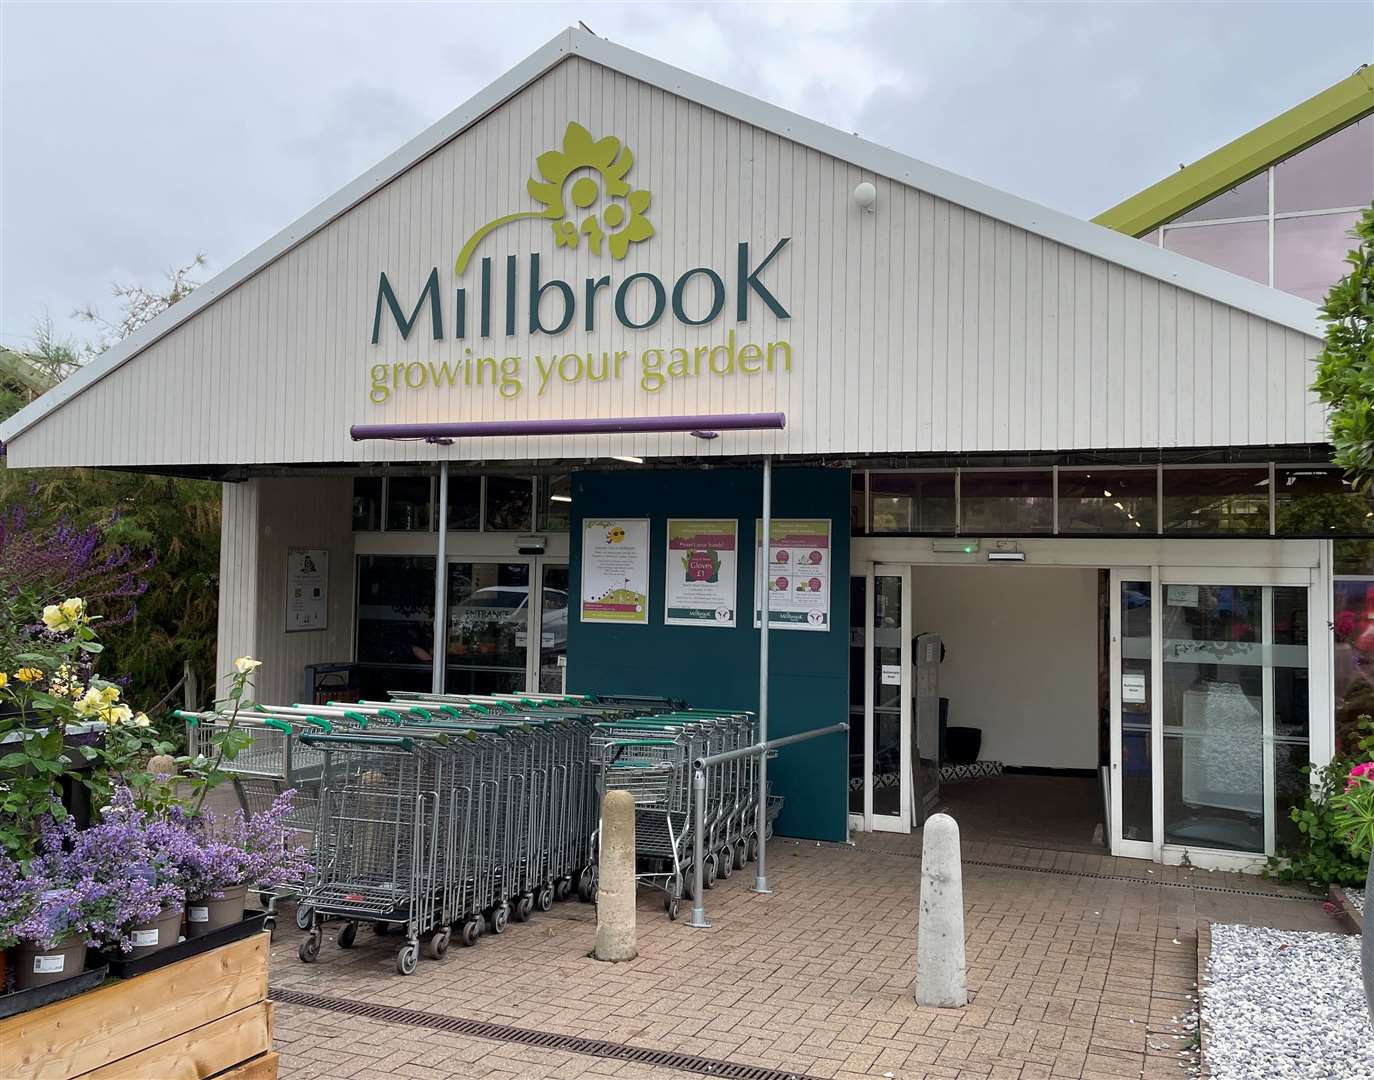 Millbrook Garden Centre in Gravesend has celebrated its 30th anniversary